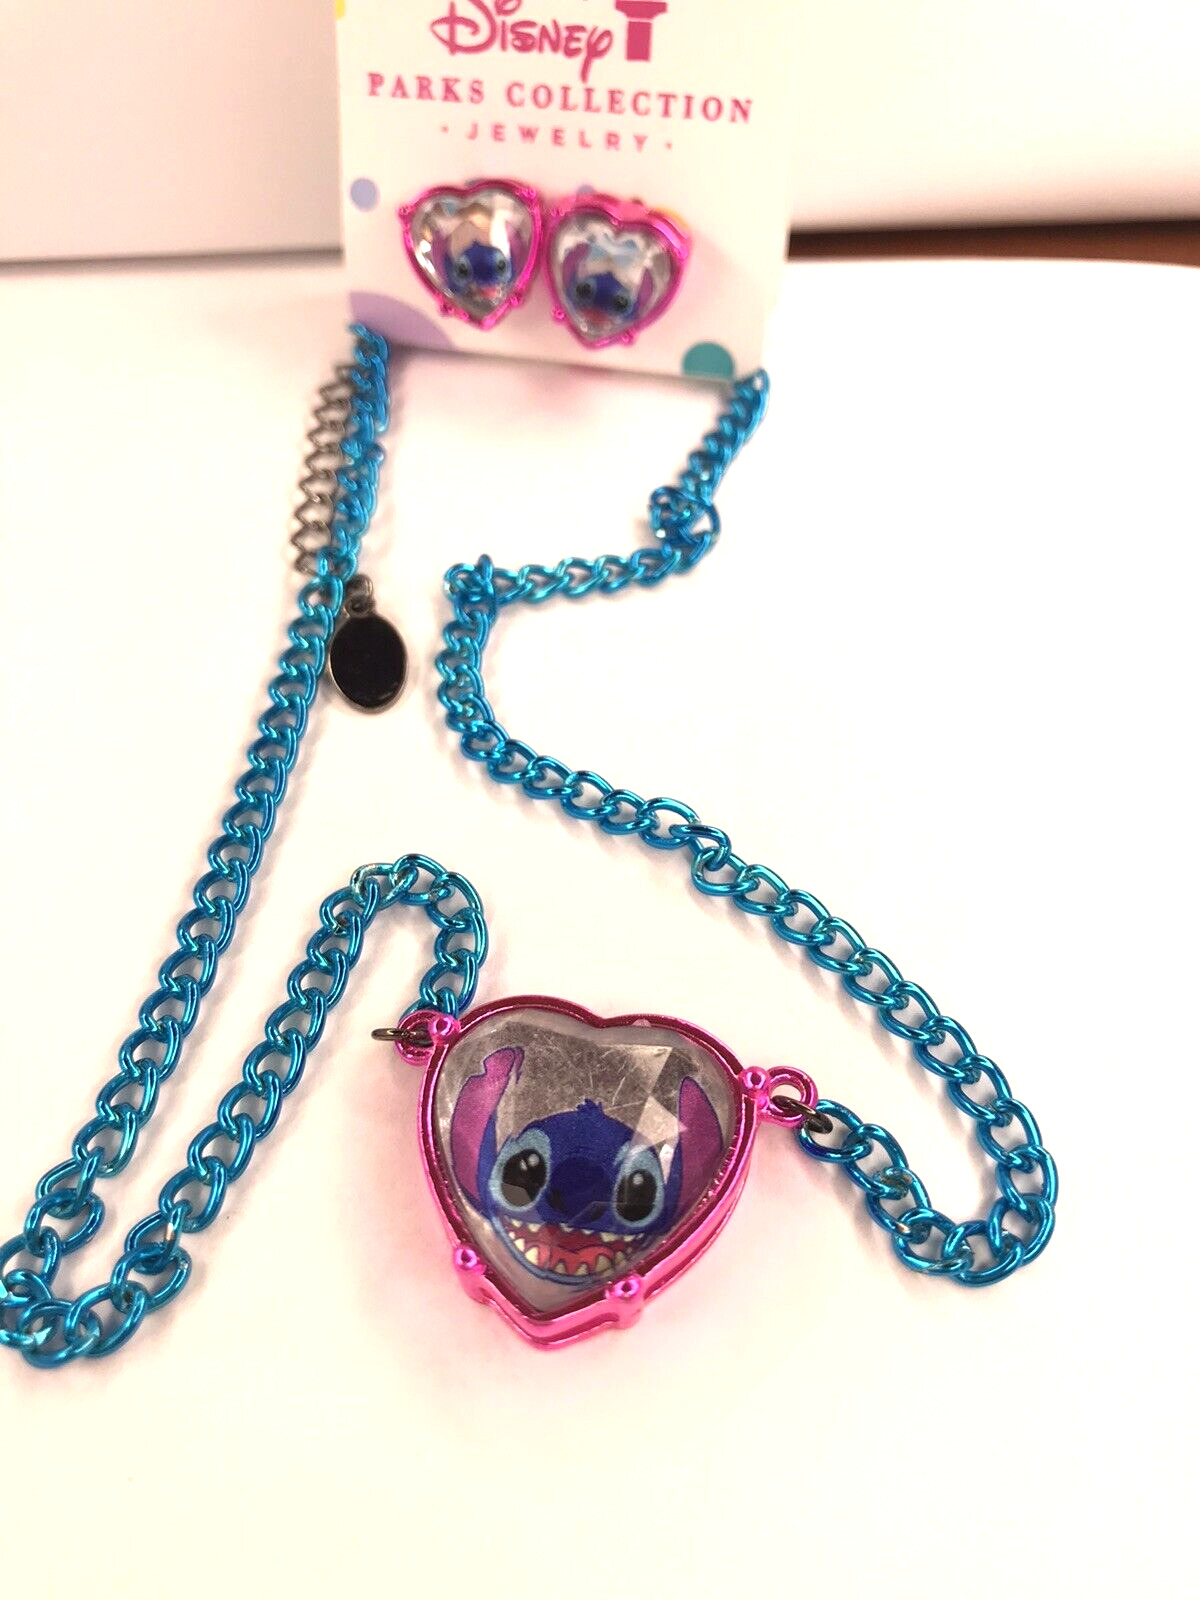 Disney Parks Collection Jewelry STITCH Heart Necklace and Earring Set Girls Kids